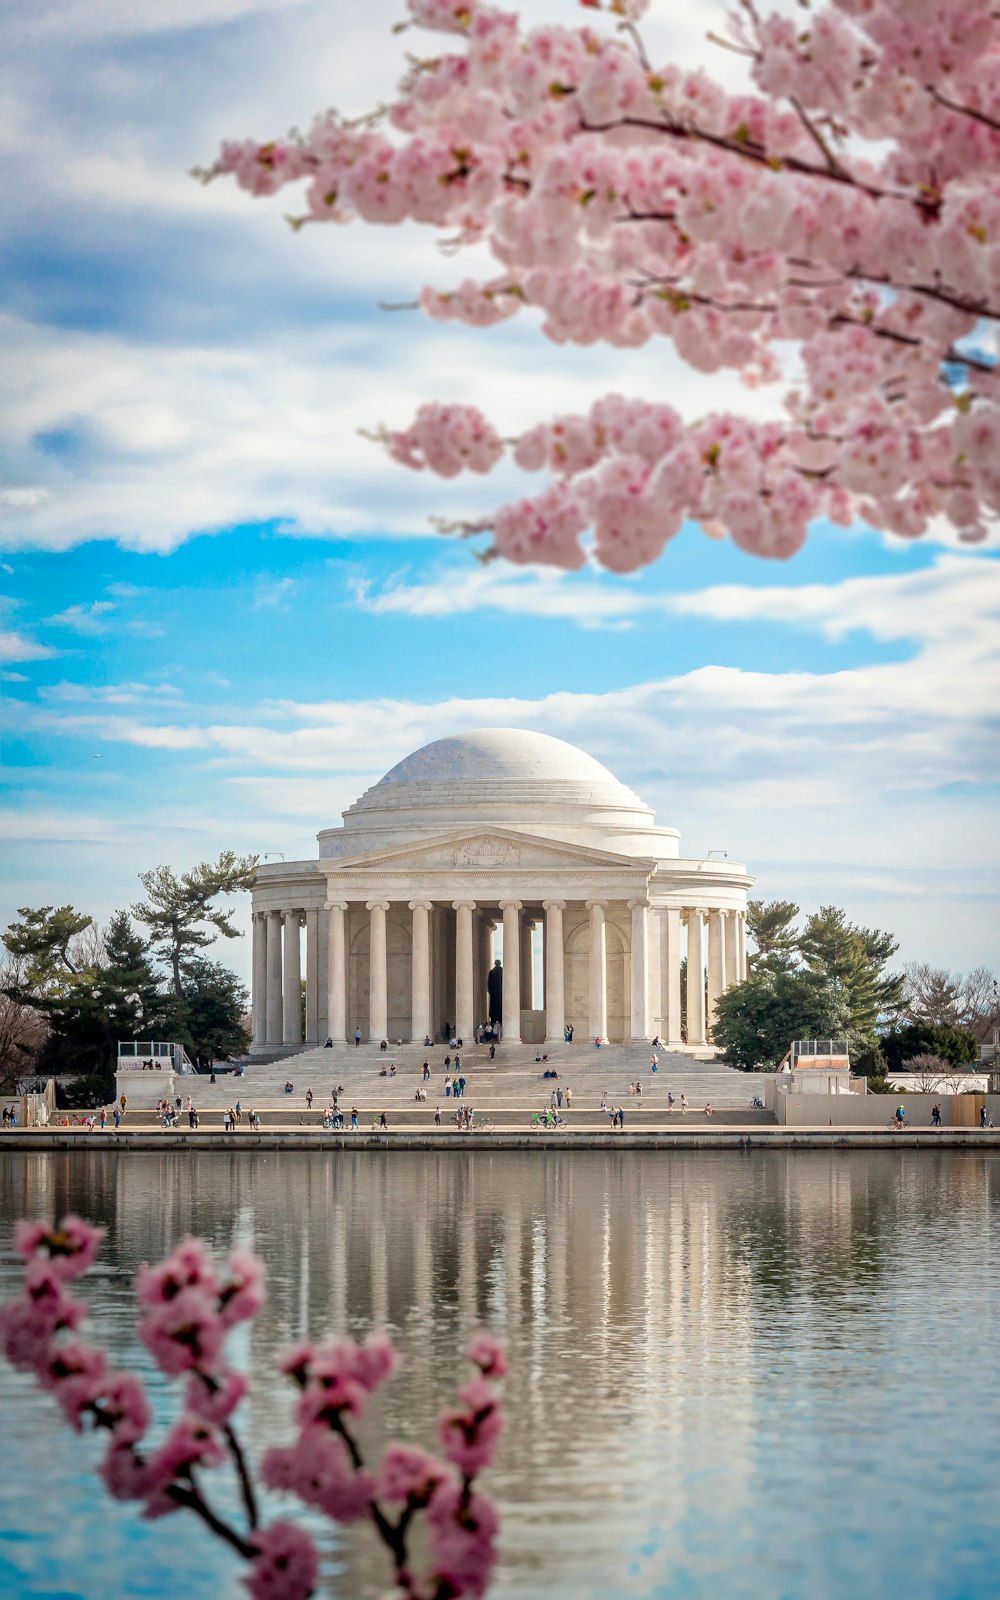 a view of the jefferson memorial with cherry blossoms in bloom